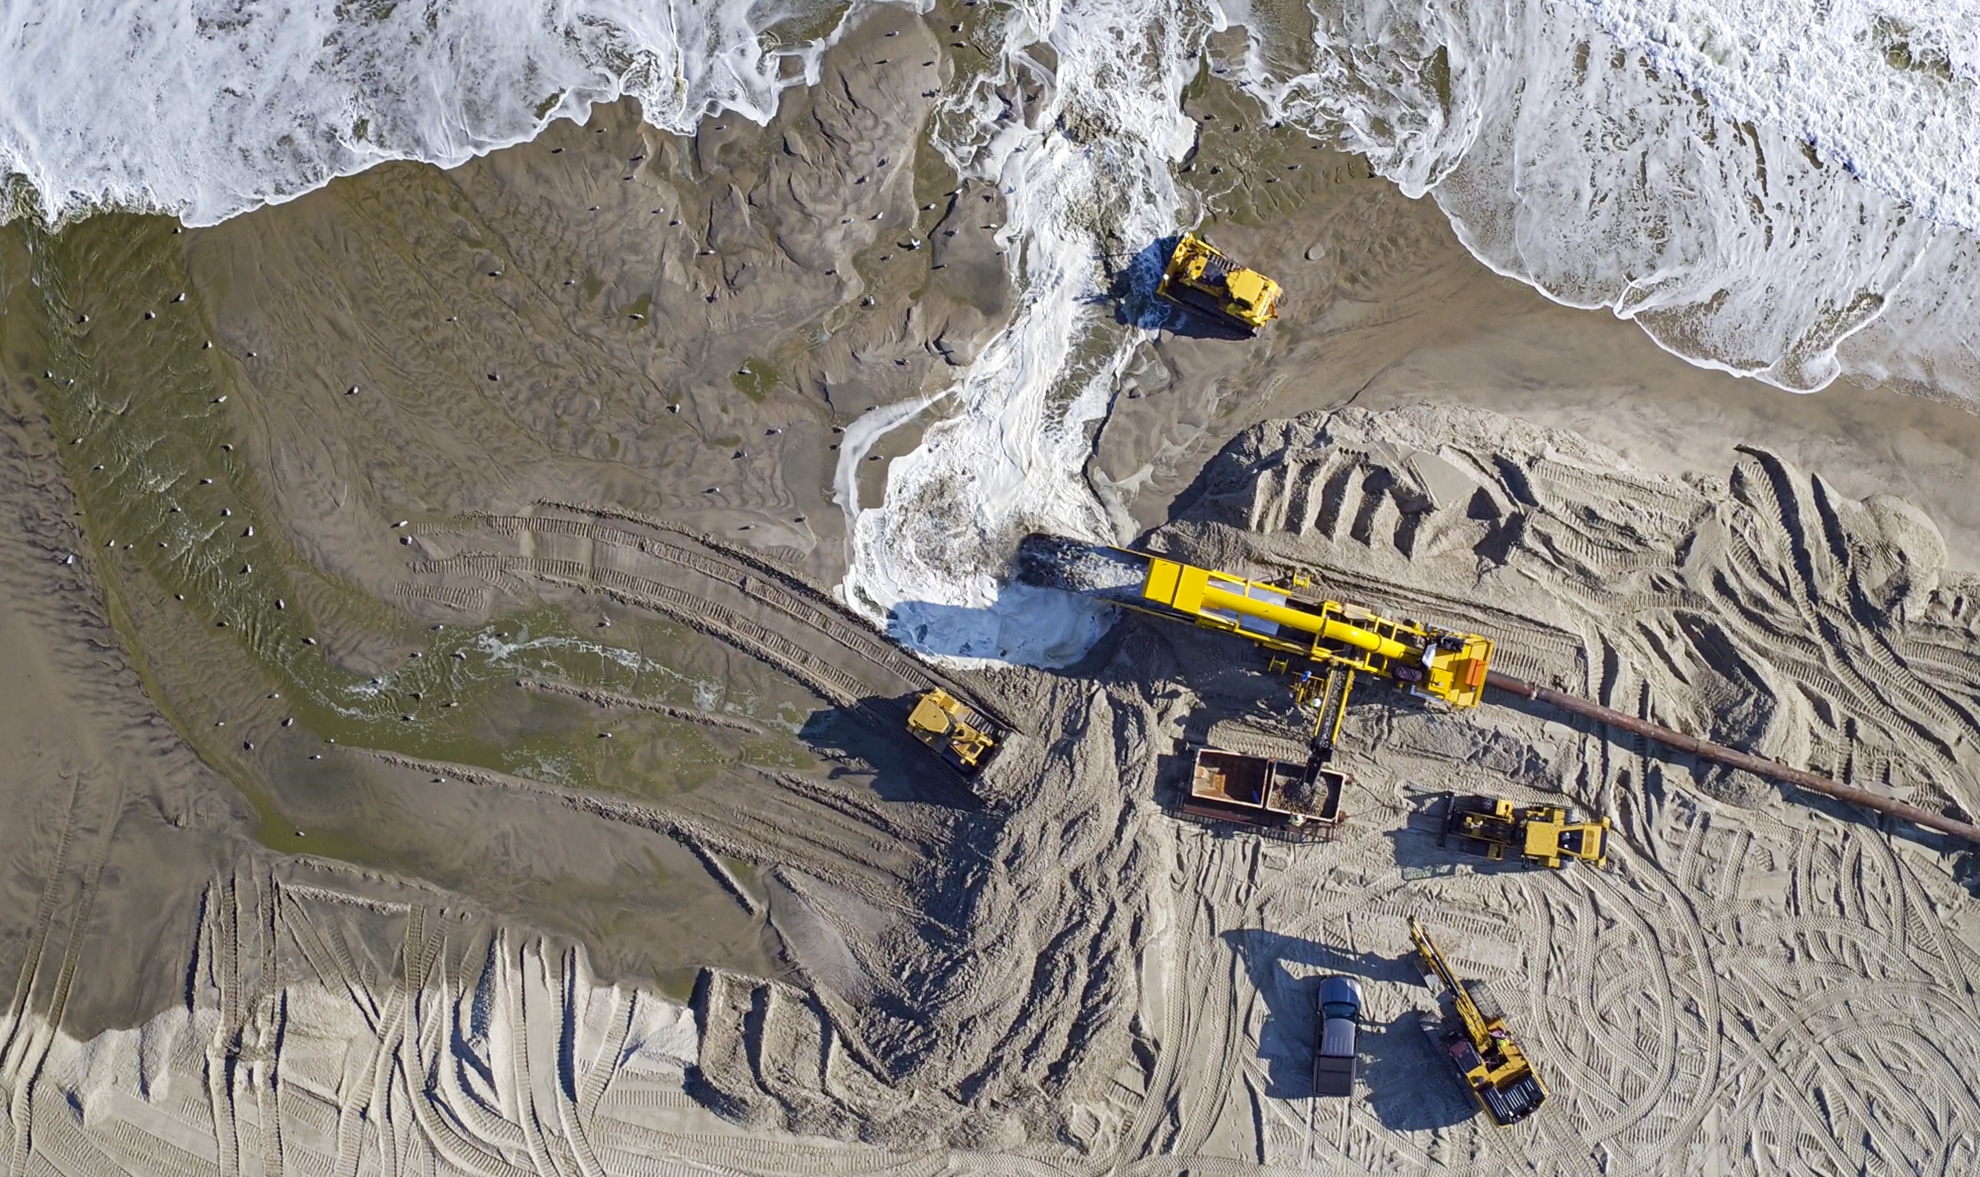 Photograph of beach reconstruction from a birds eye view taken with a drone